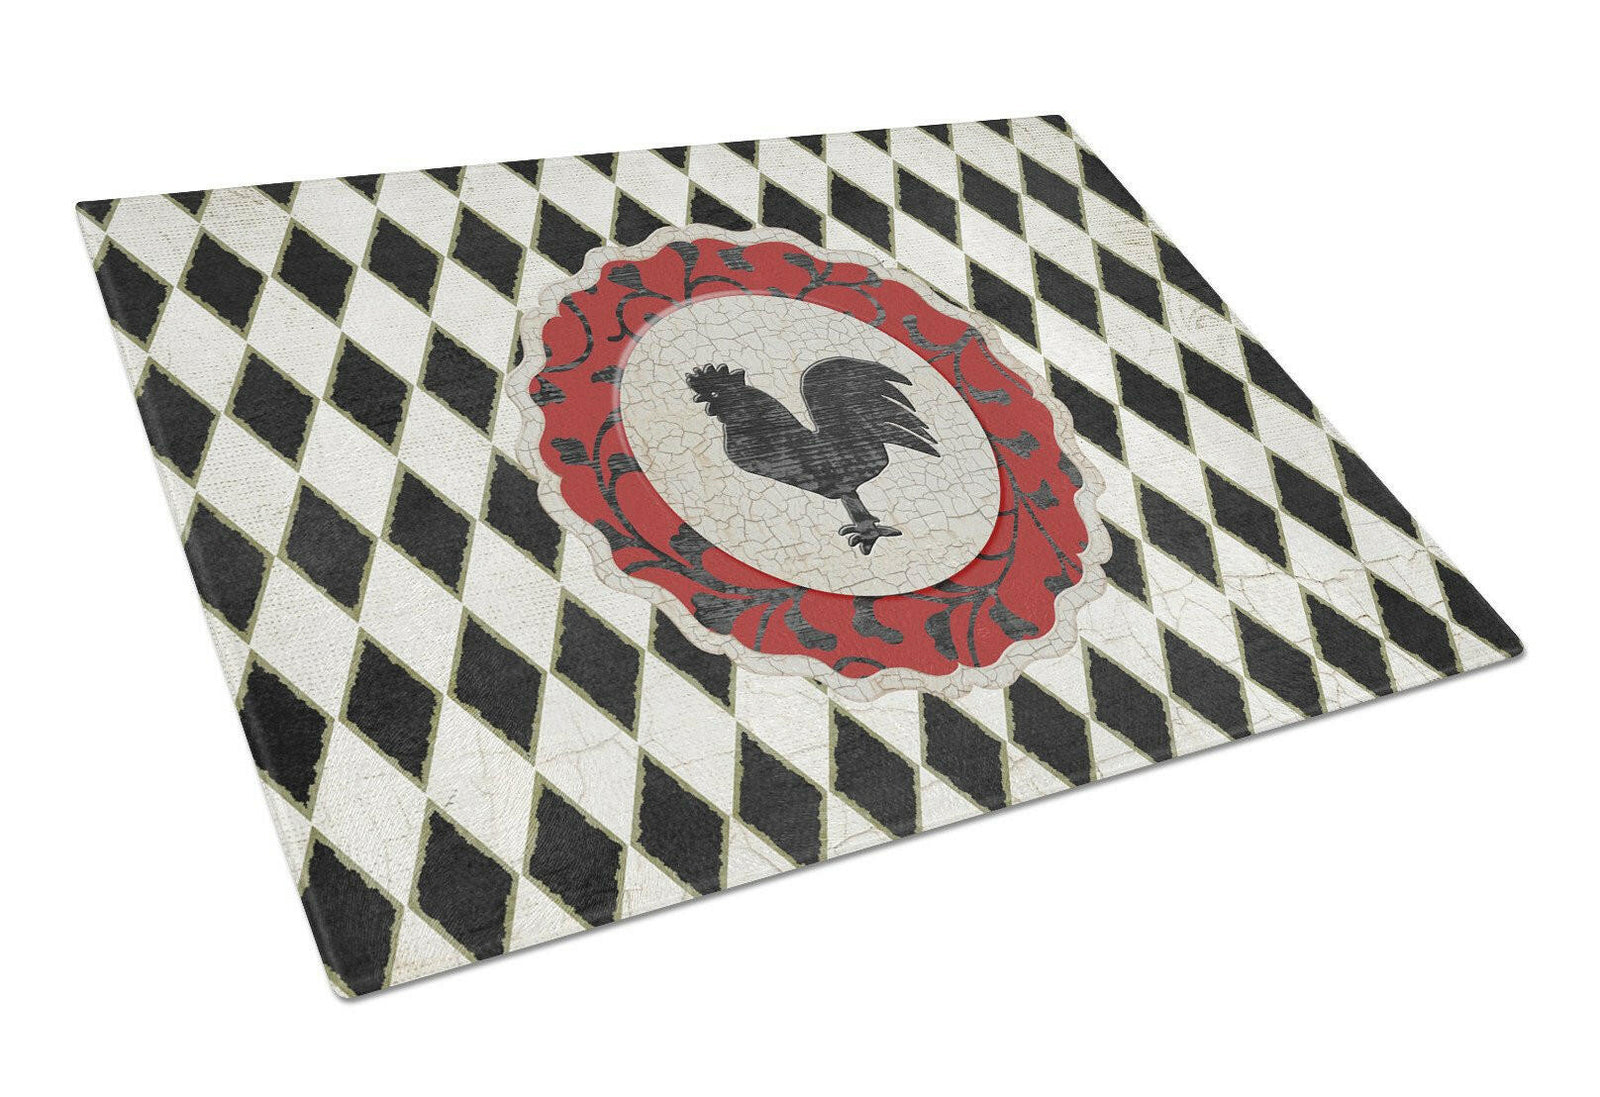 Rooster Harlequin Black and white Glass Cutting Board Large Size SB3086LCB by Caroline's Treasures